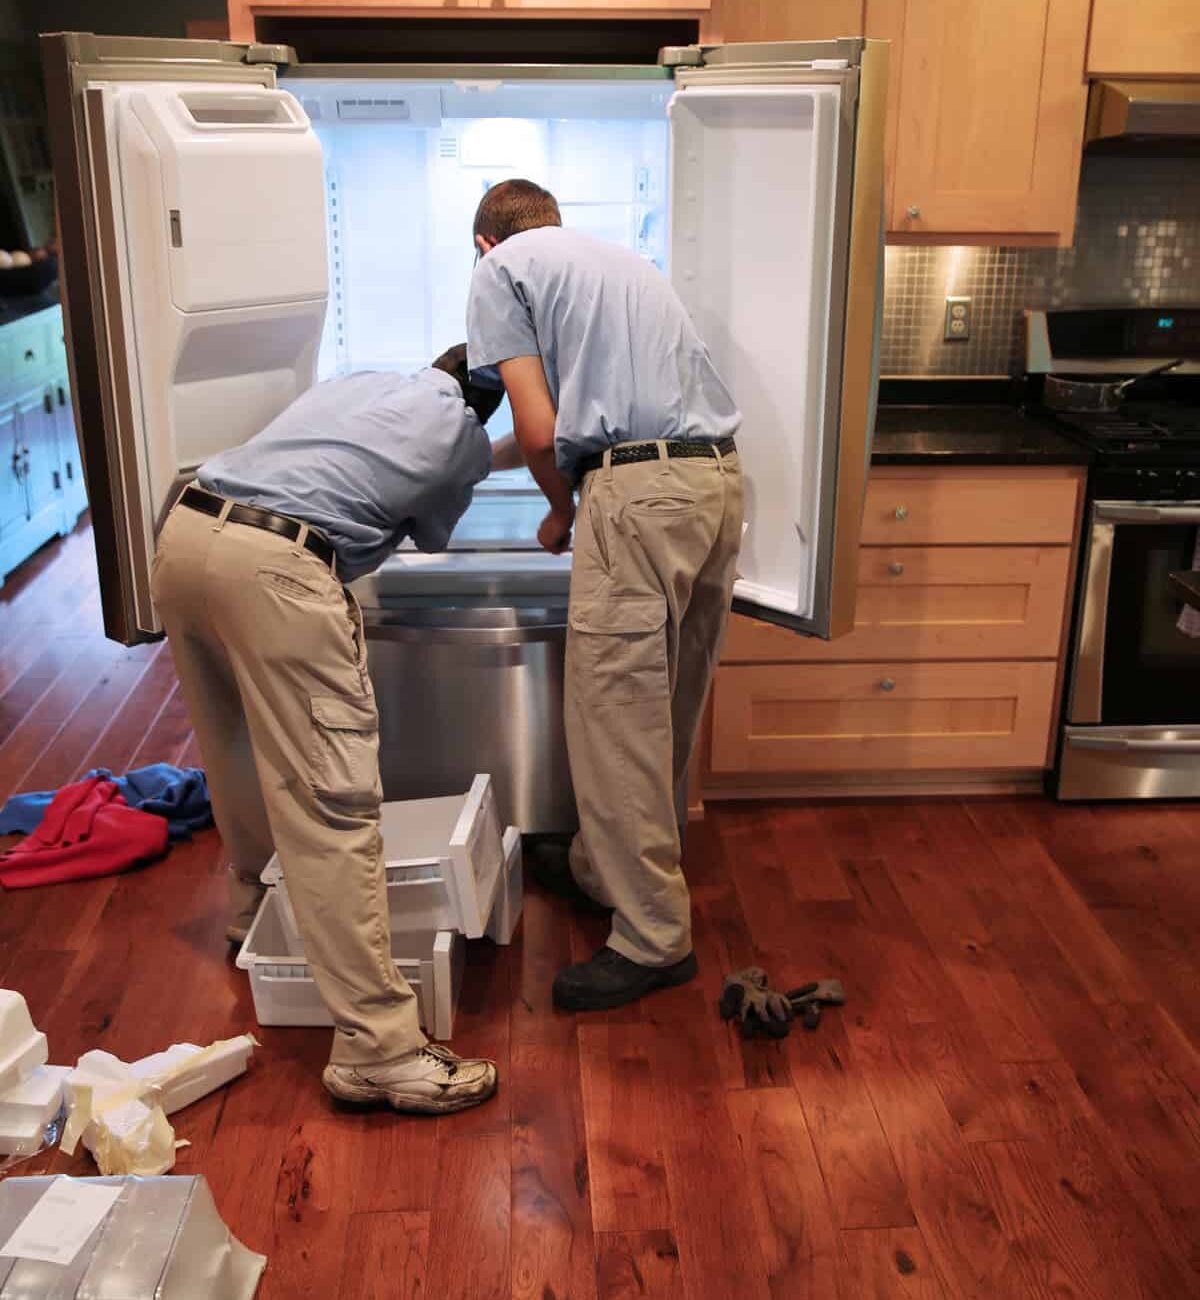 The pros and cons of removing a refrigerator door